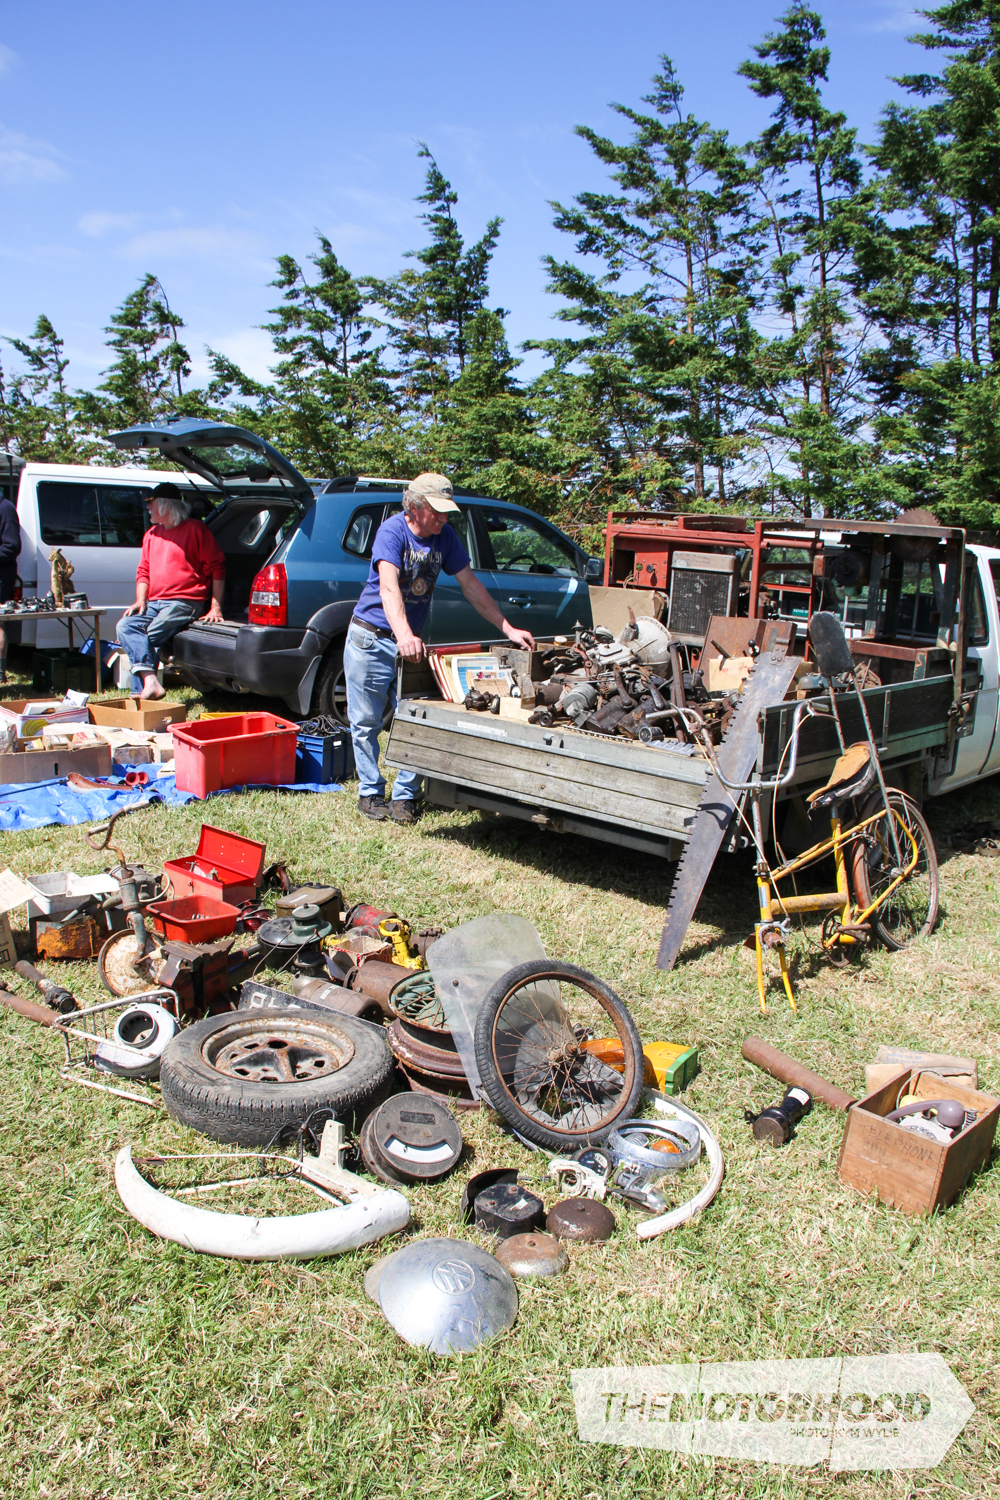 Plenty of old and rare car parts were up for grabs at the swap meet